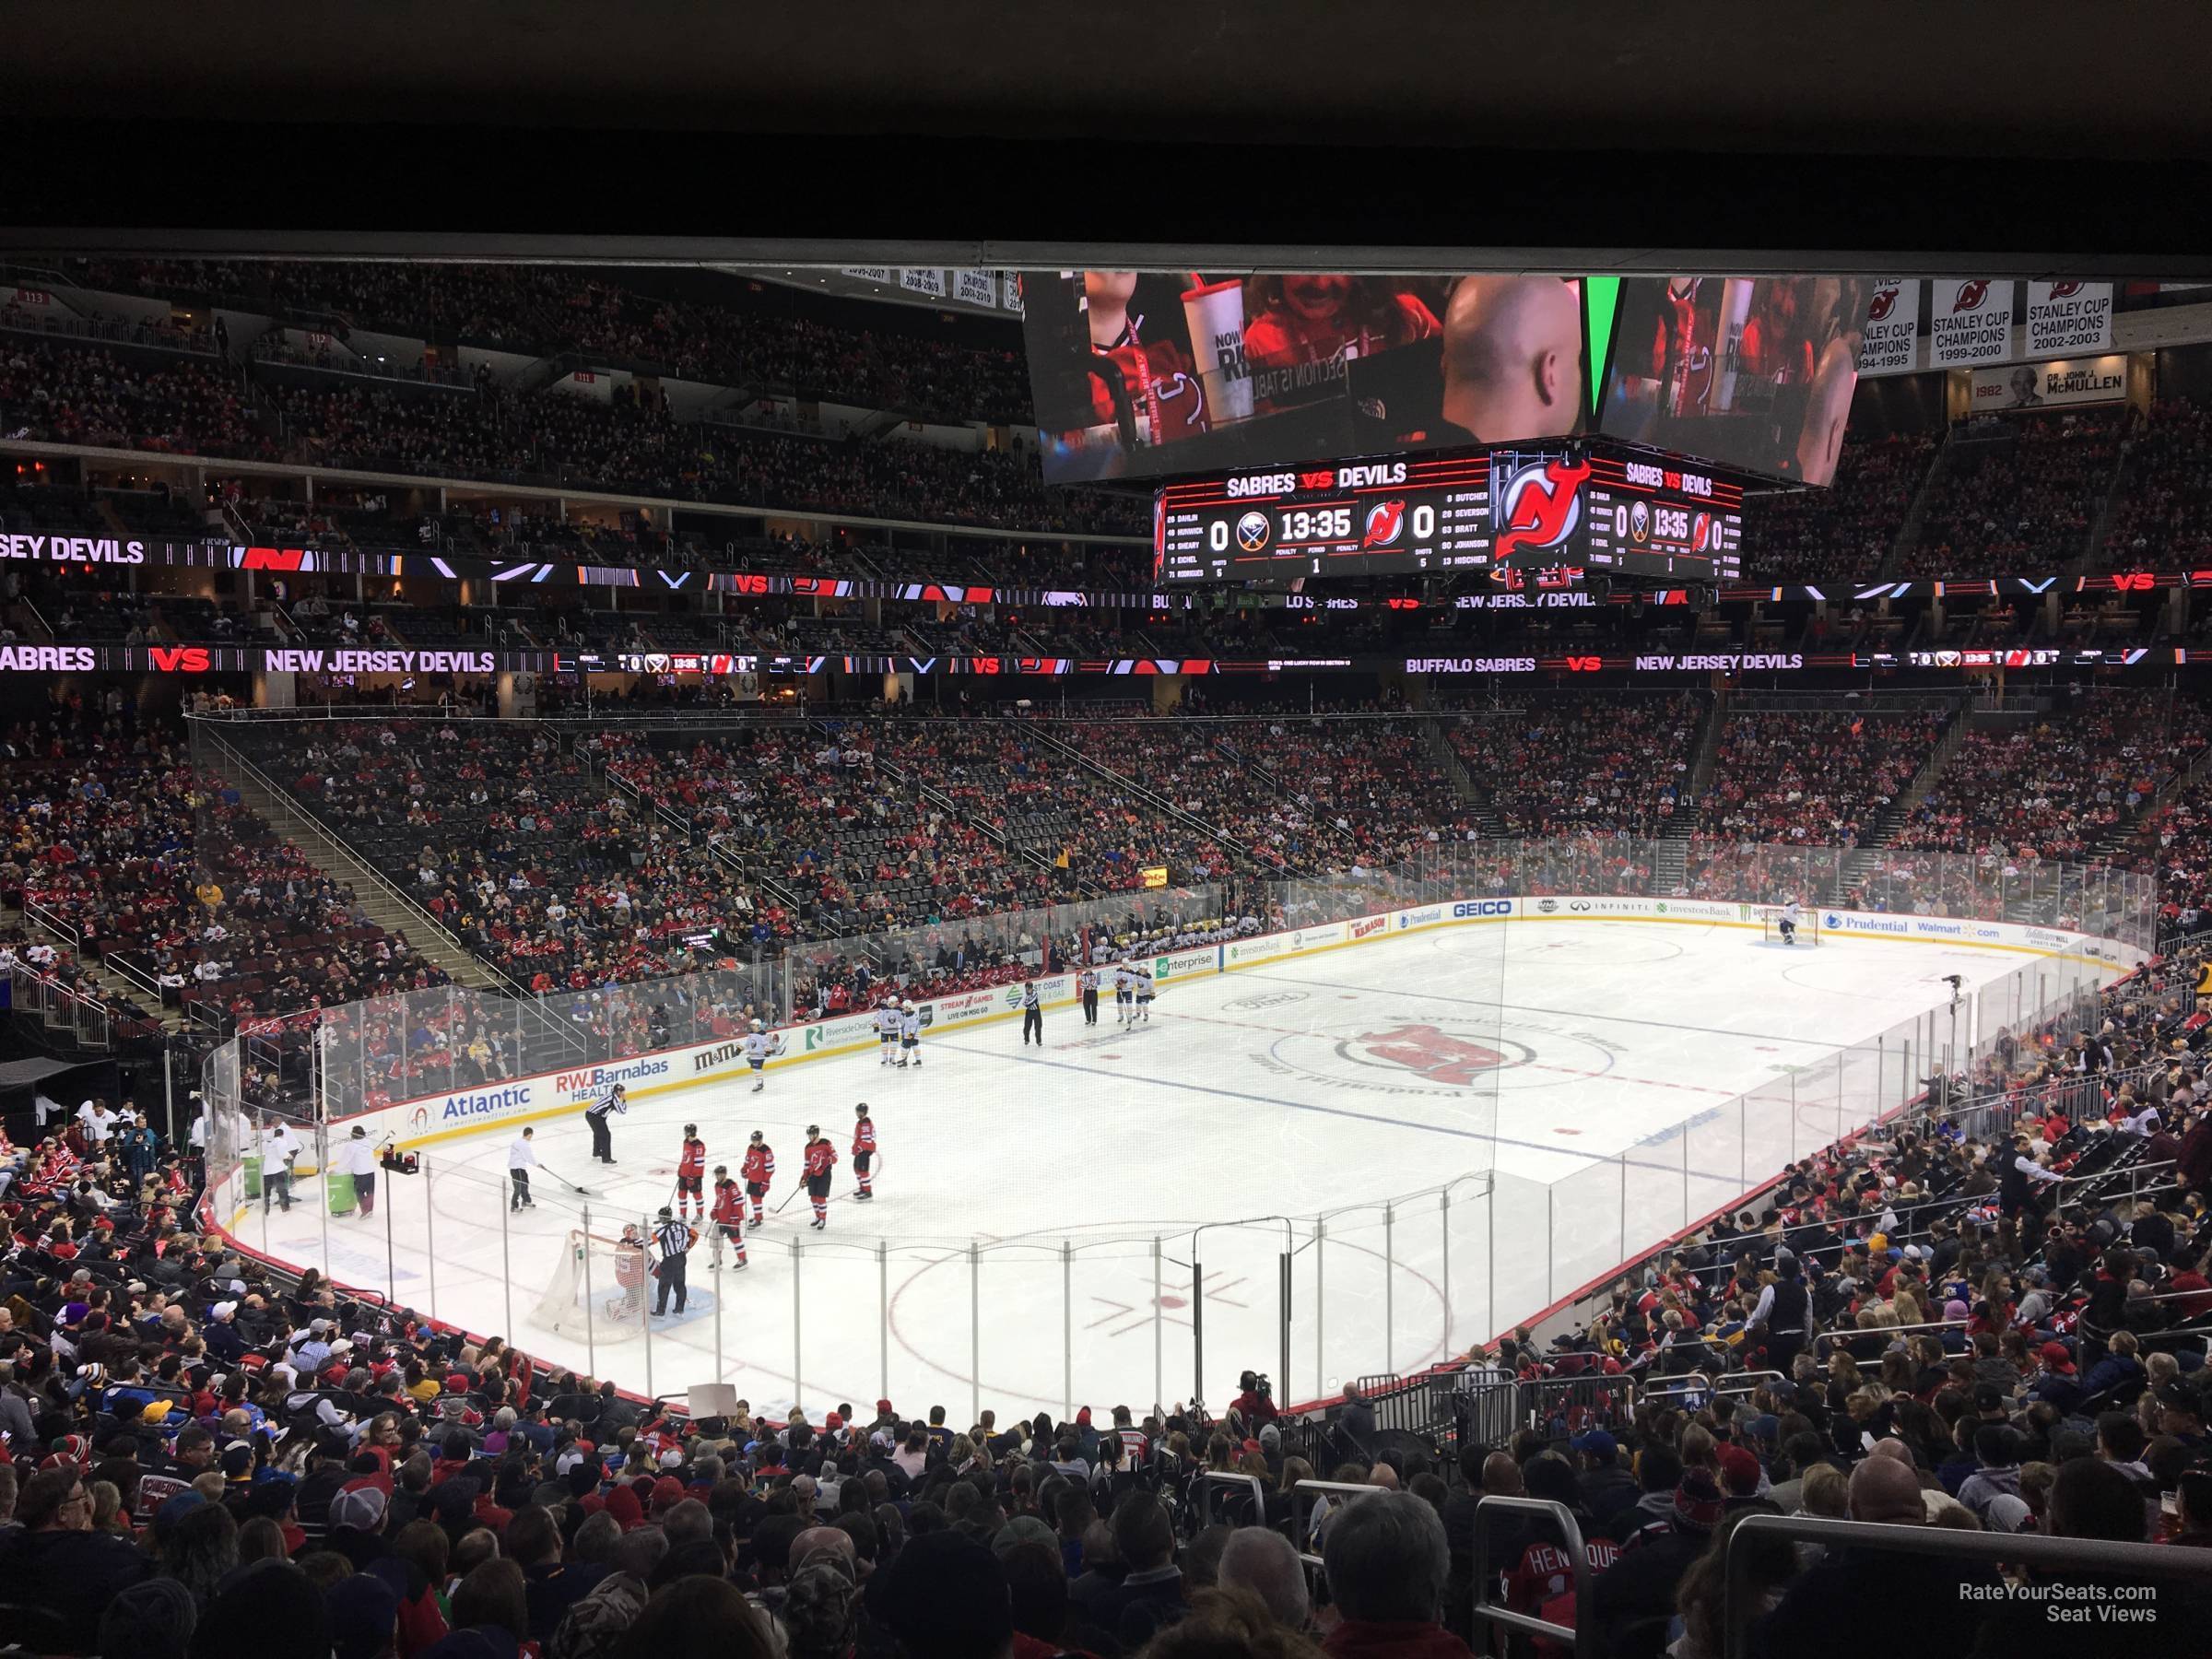 Reviewing the Prudential Center, Home of the New Jersey Devils